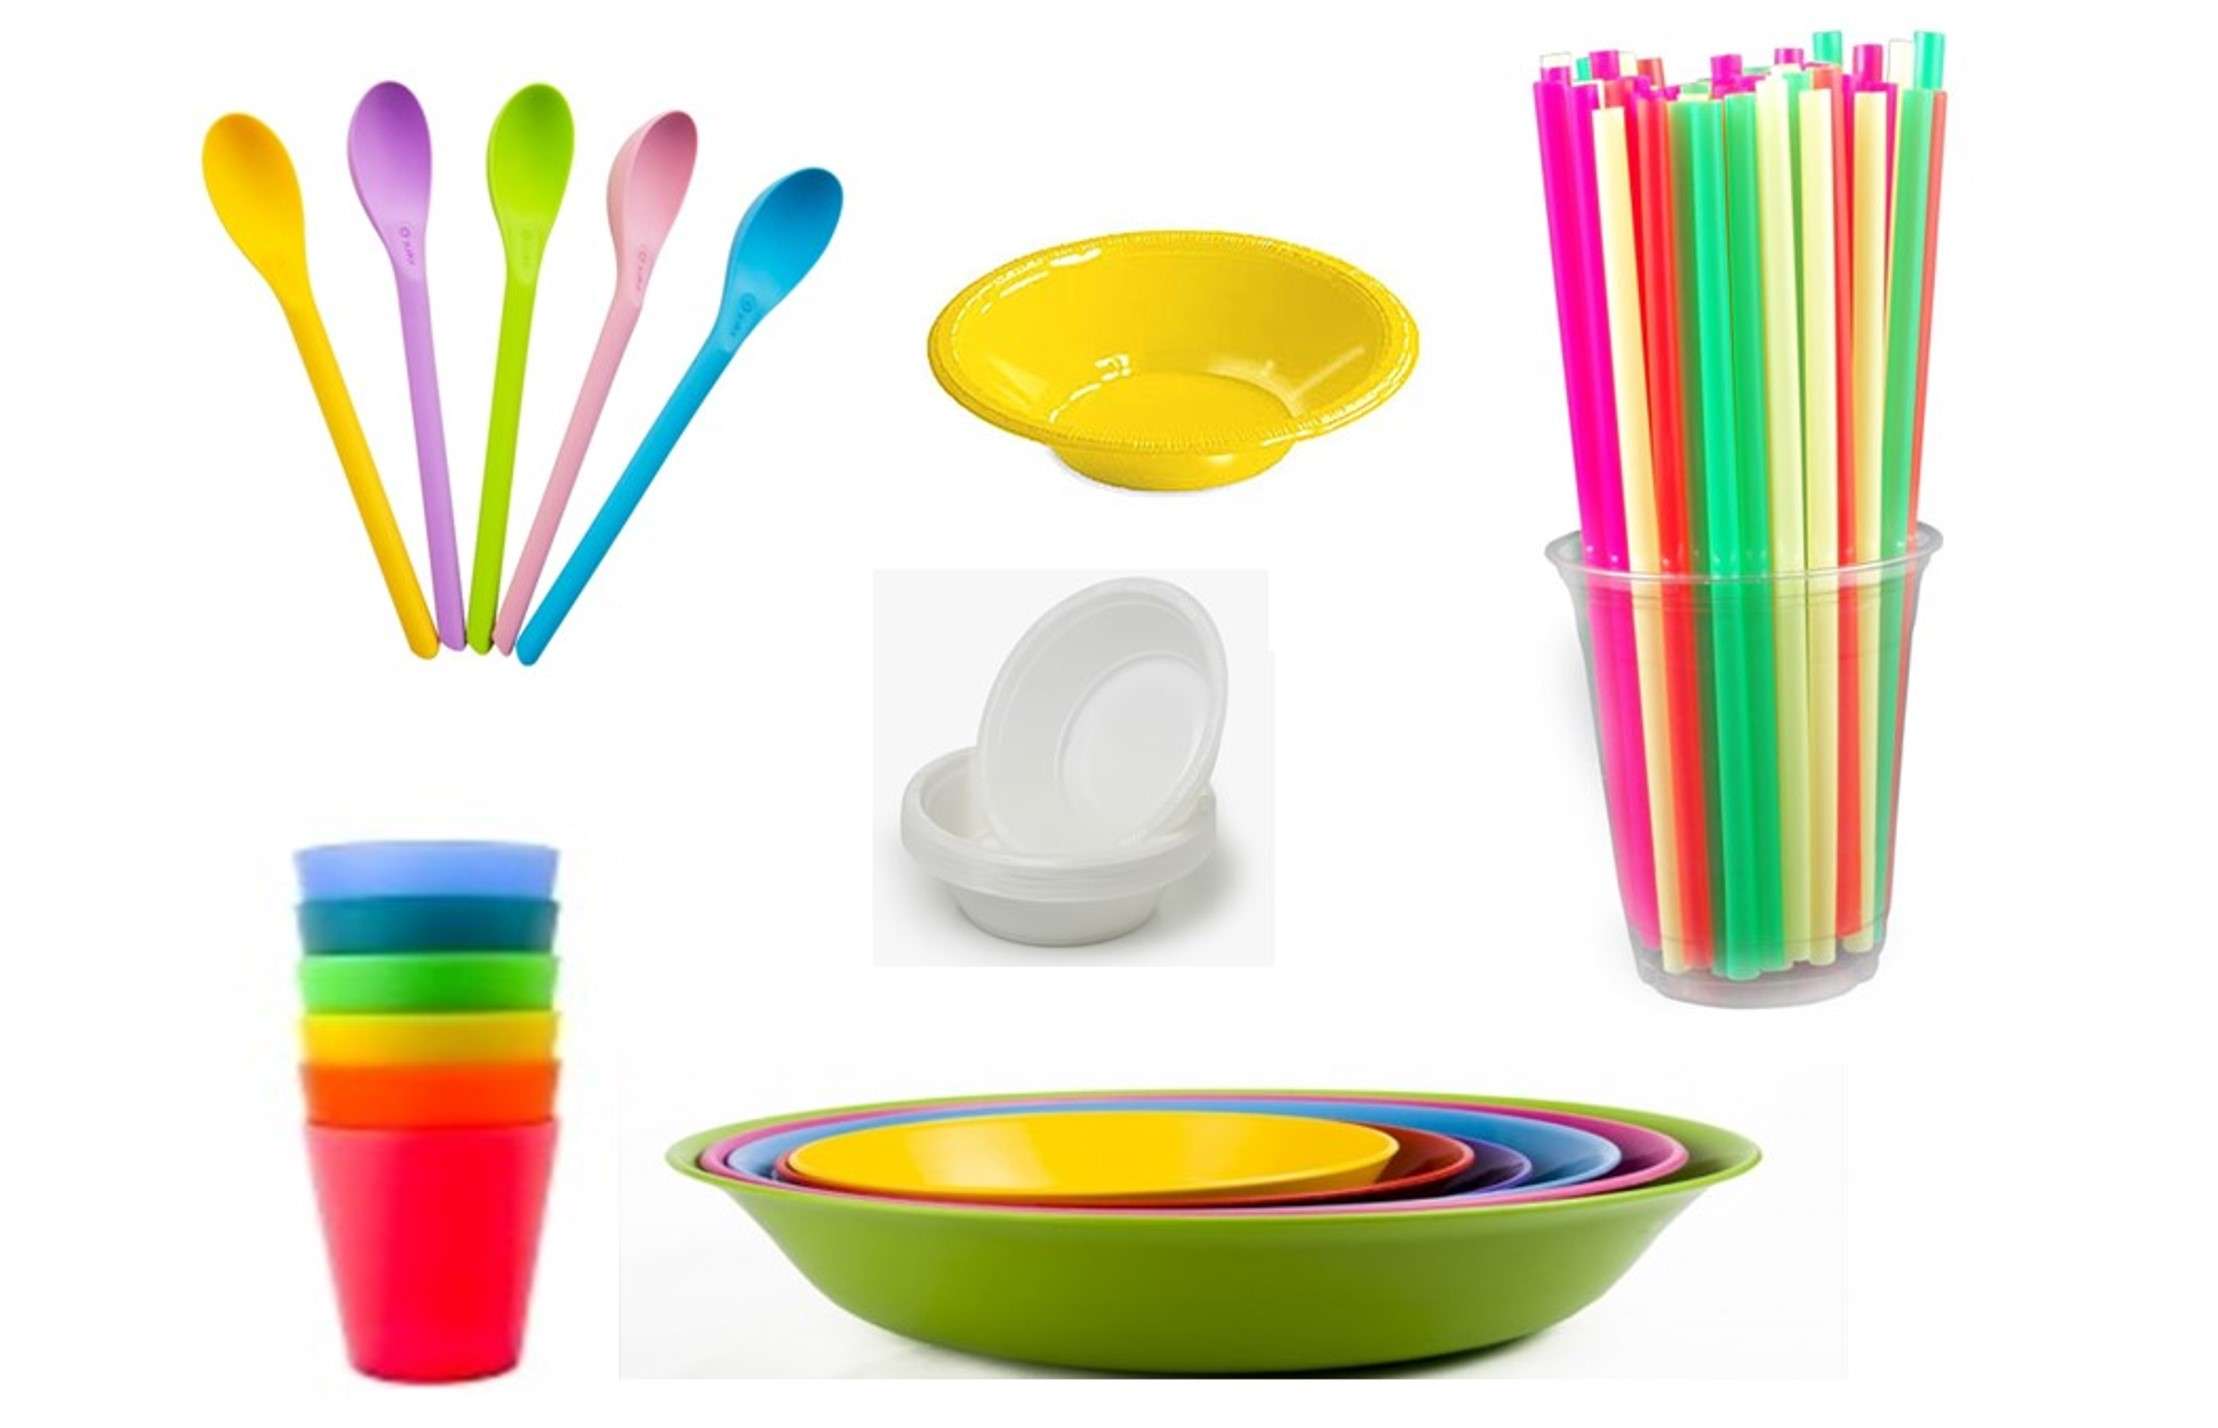 guidelines to choose the safest plasticware